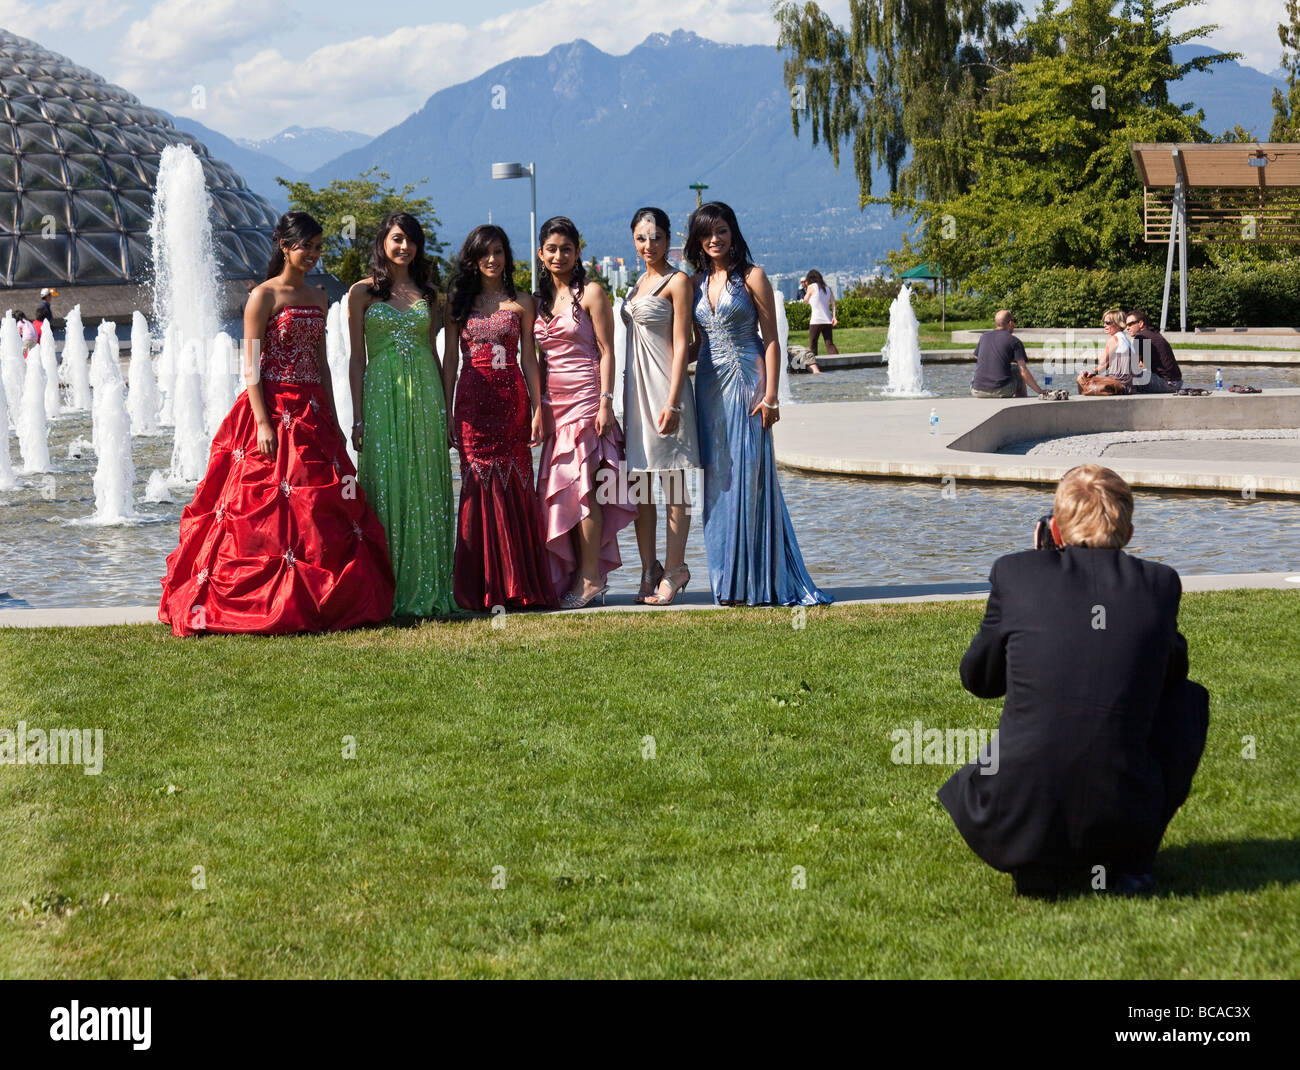 boy photographing girl students in formal dress for school prom at Queen Elizabeth Park, Vancouver, British Columbia, Canada Stock Photo